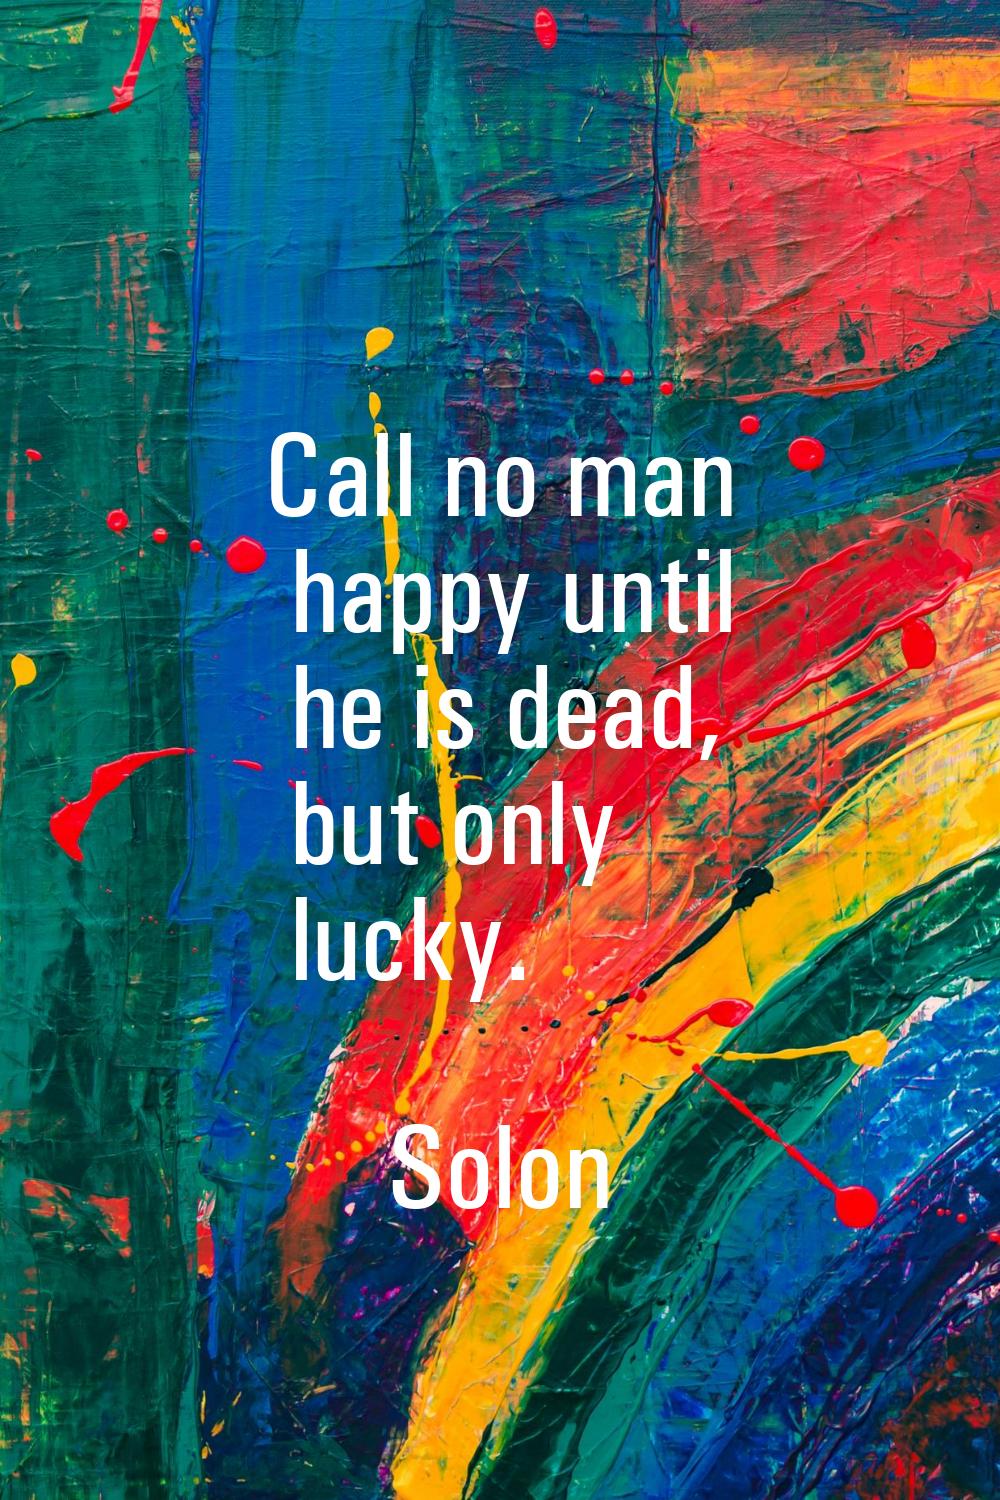 Call no man happy until he is dead, but only lucky.